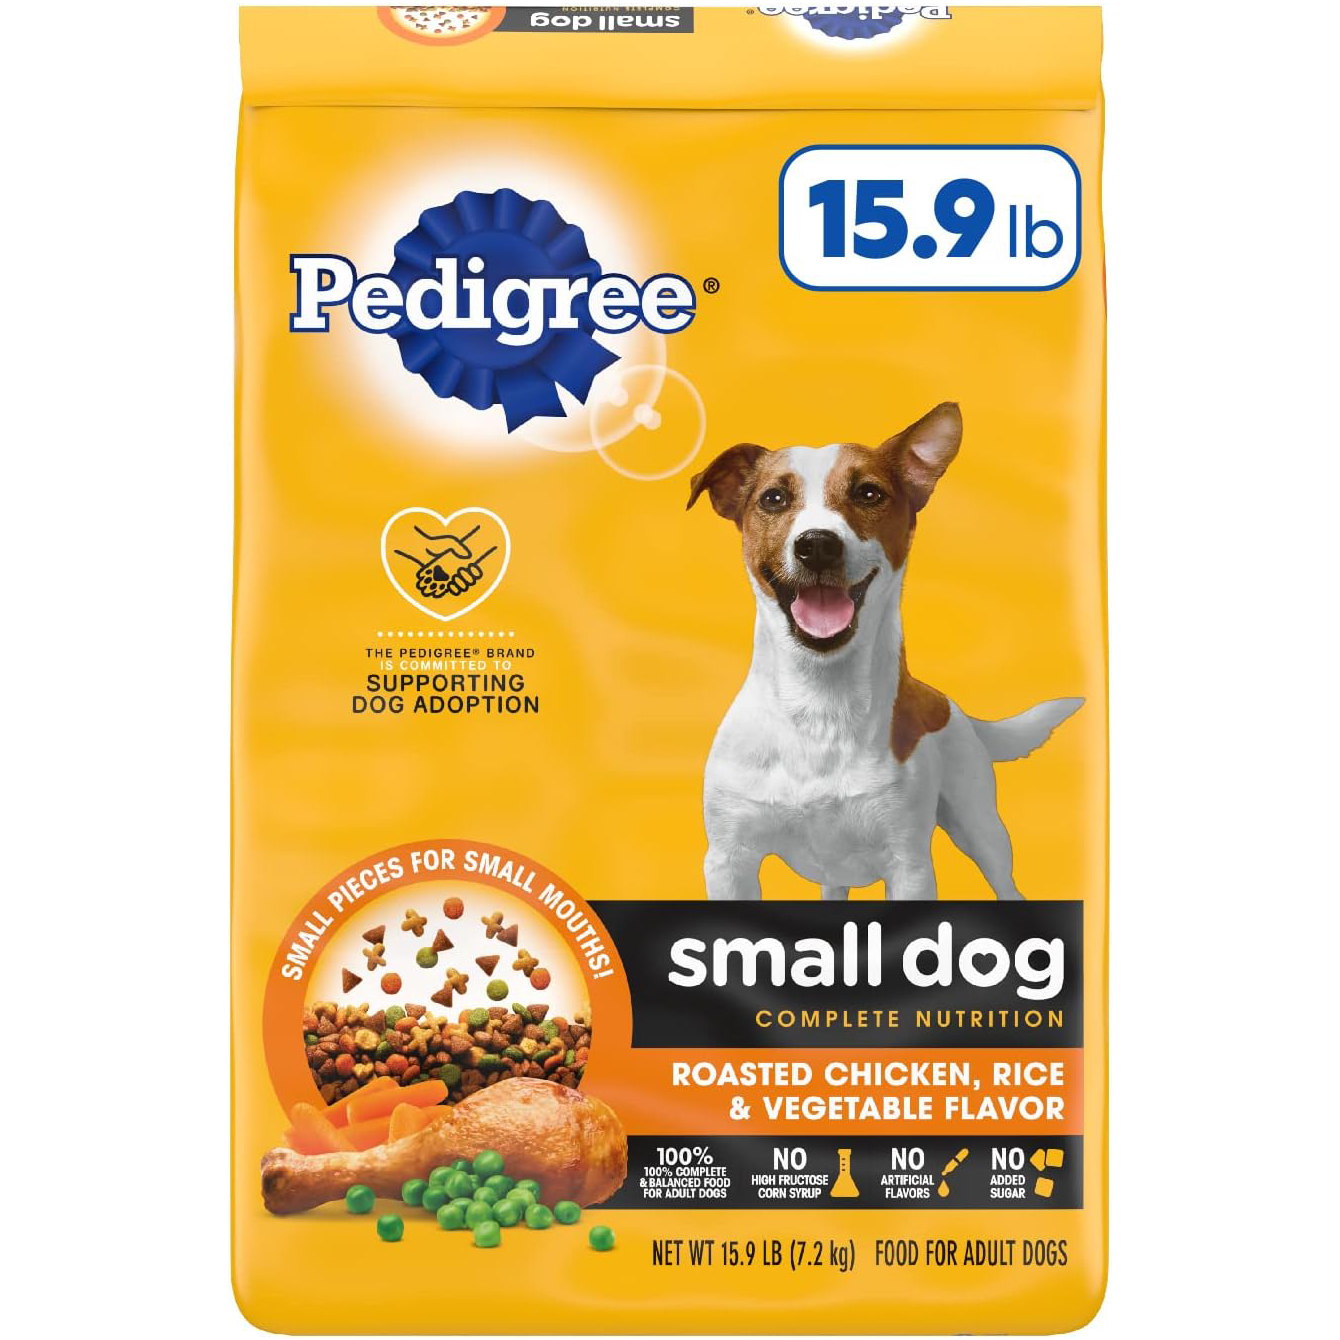 PEDIGREE Small Dog Adult Complete Nutrition Roasted Chicken, Rice & Vegetable Flavor Dry Dog Food 